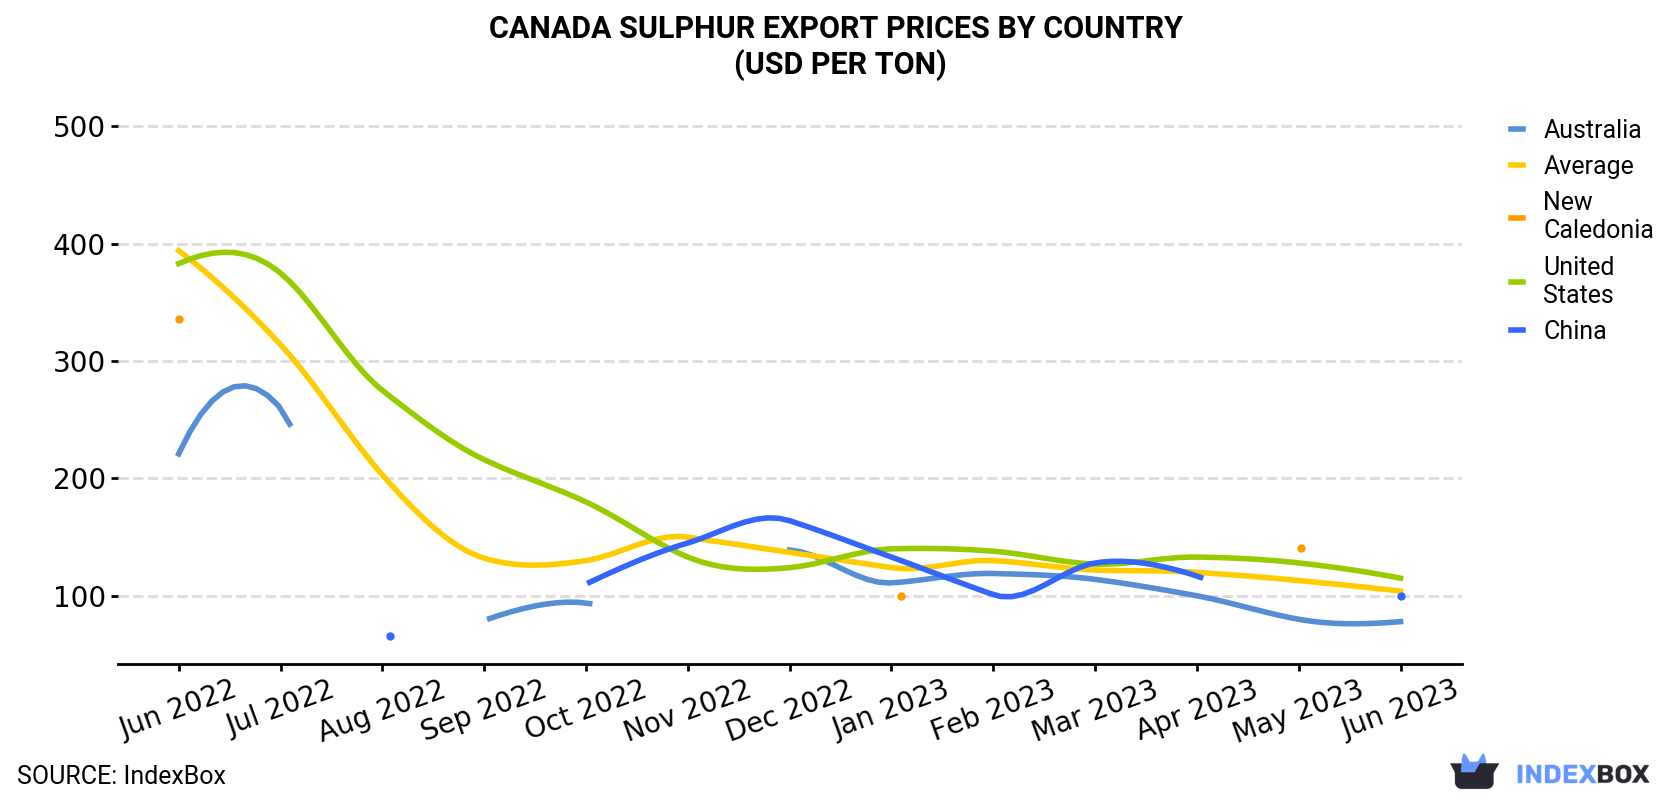 Canada Sulphur Export Prices By Country (USD Per Ton)